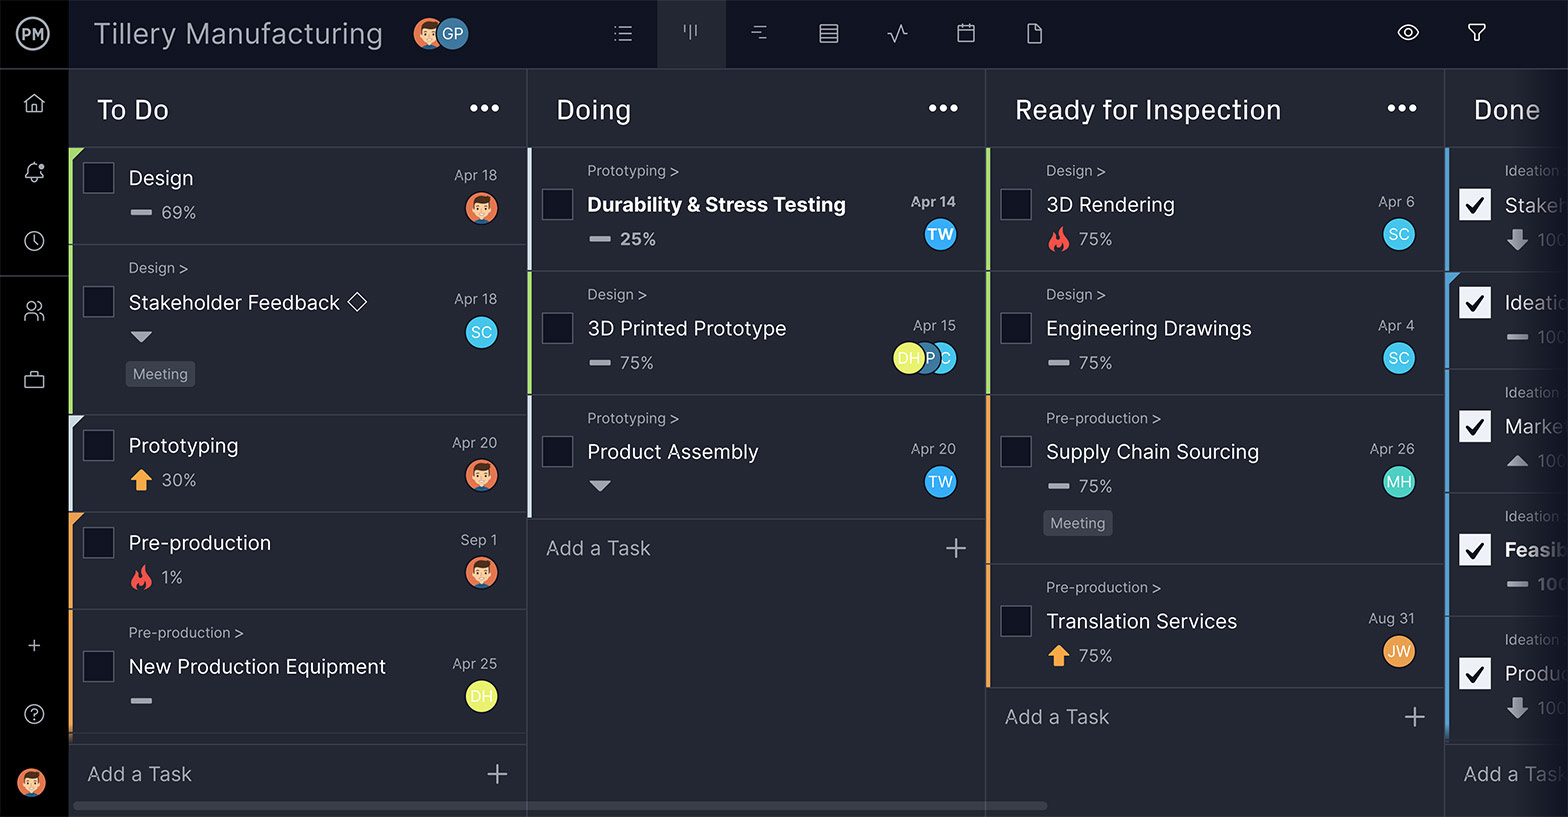 ProjectManager's Kanban boards allow you to plan and execute IT project management plans